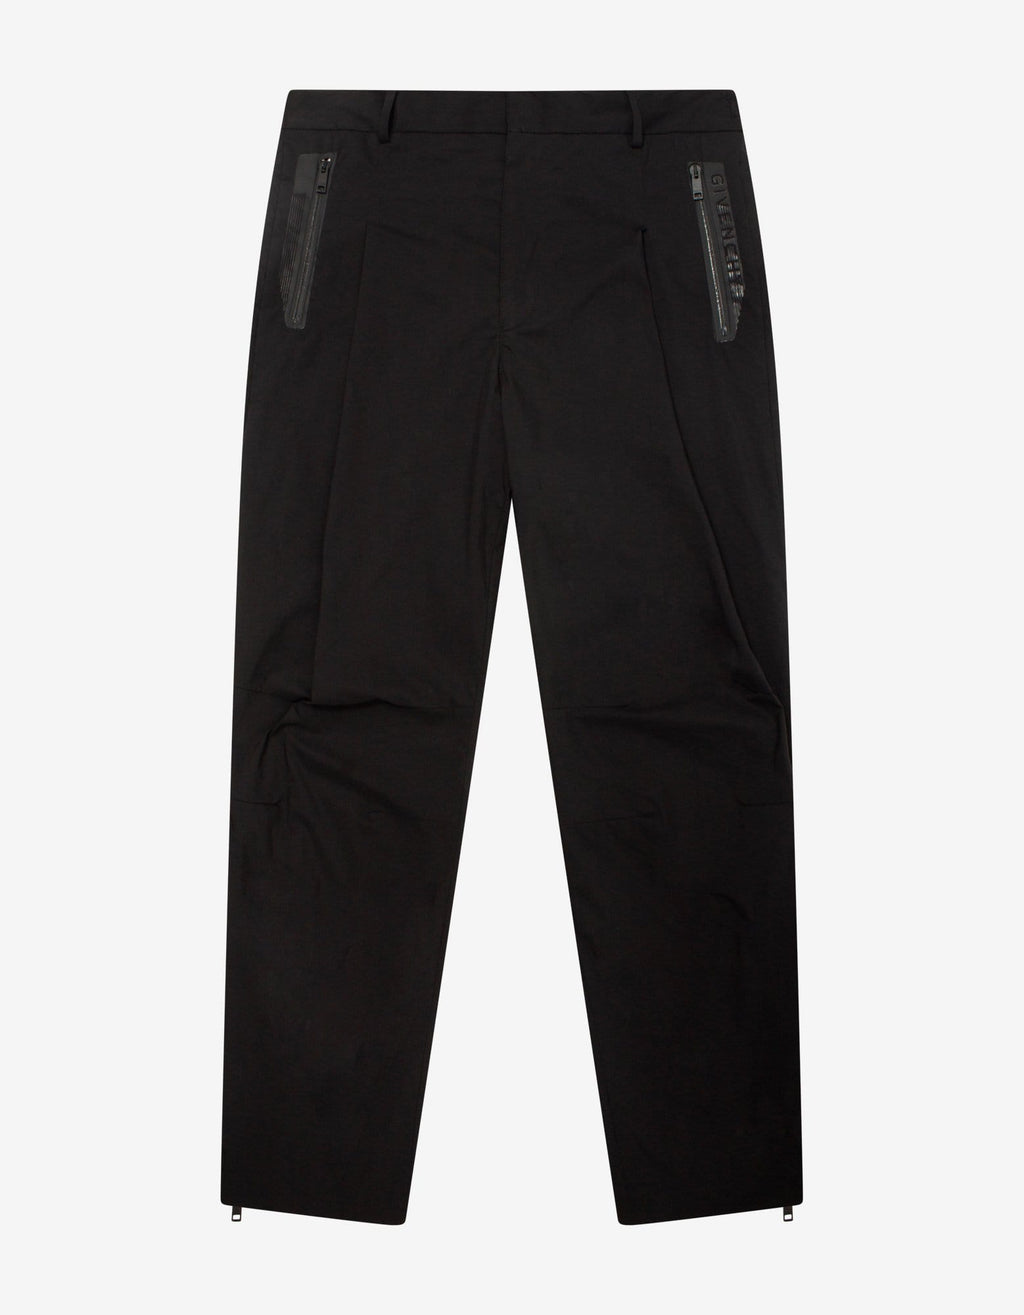 Givenchy Givenchy Black Technical Trousers